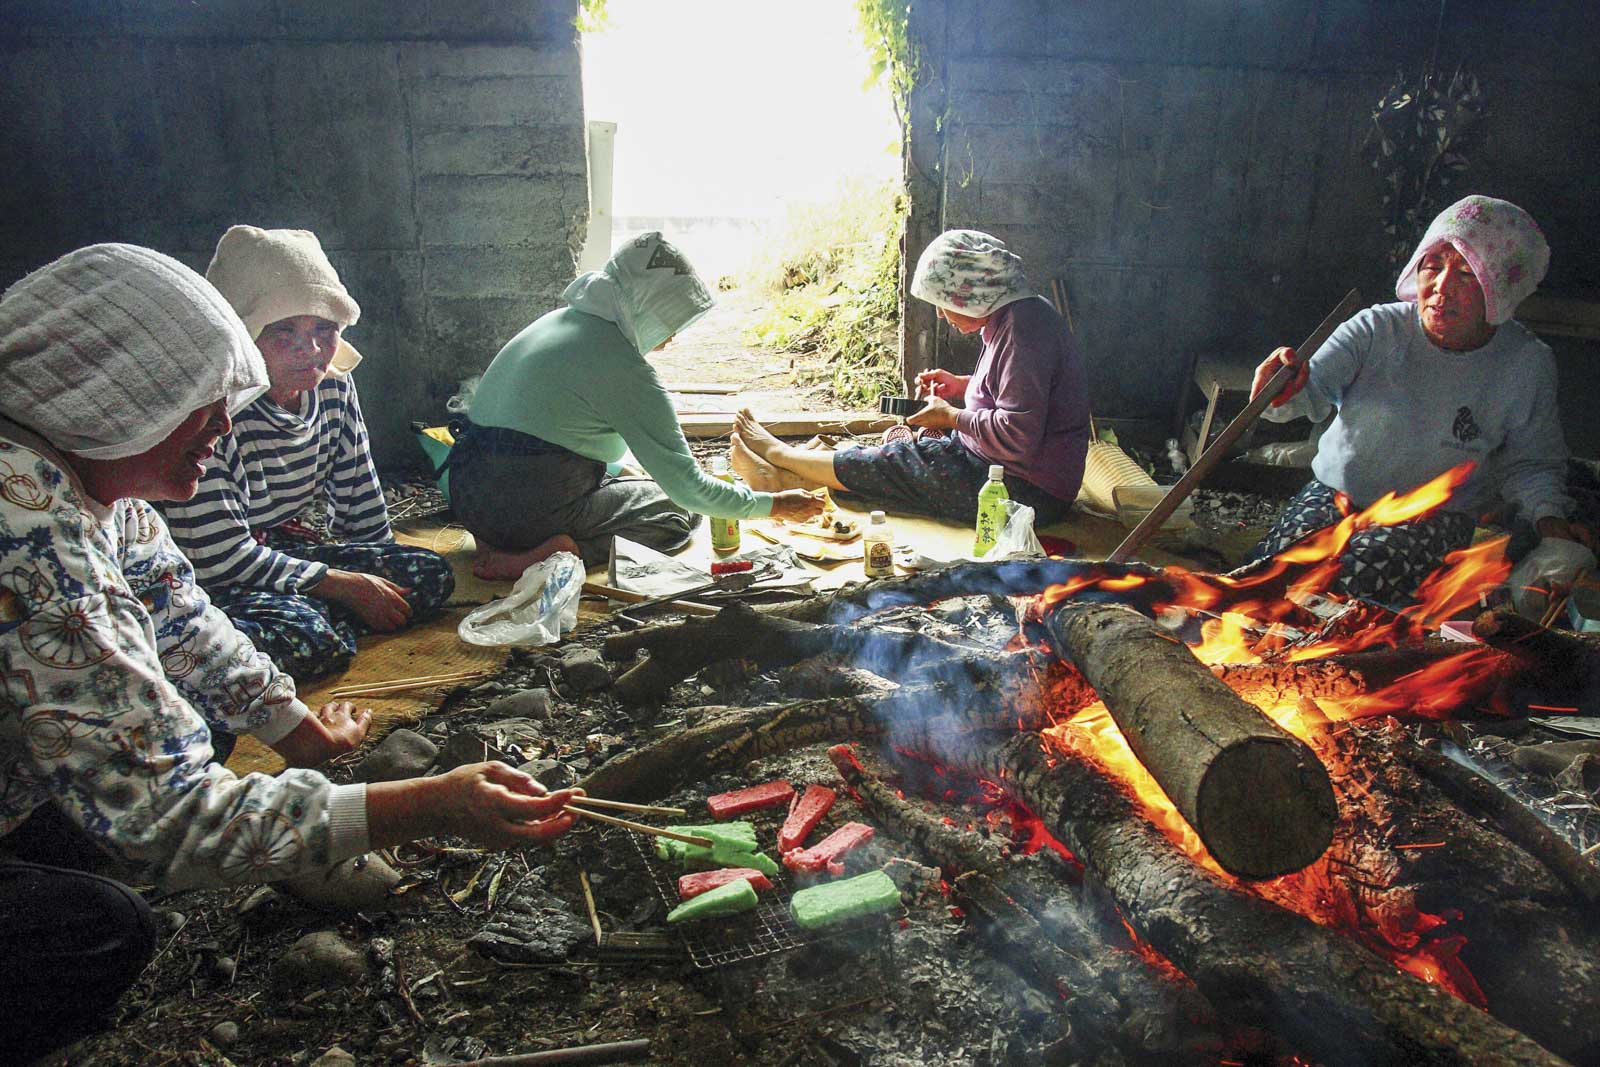 Ama, female divers keep them warm by a bonfire and have lunch together after fishing